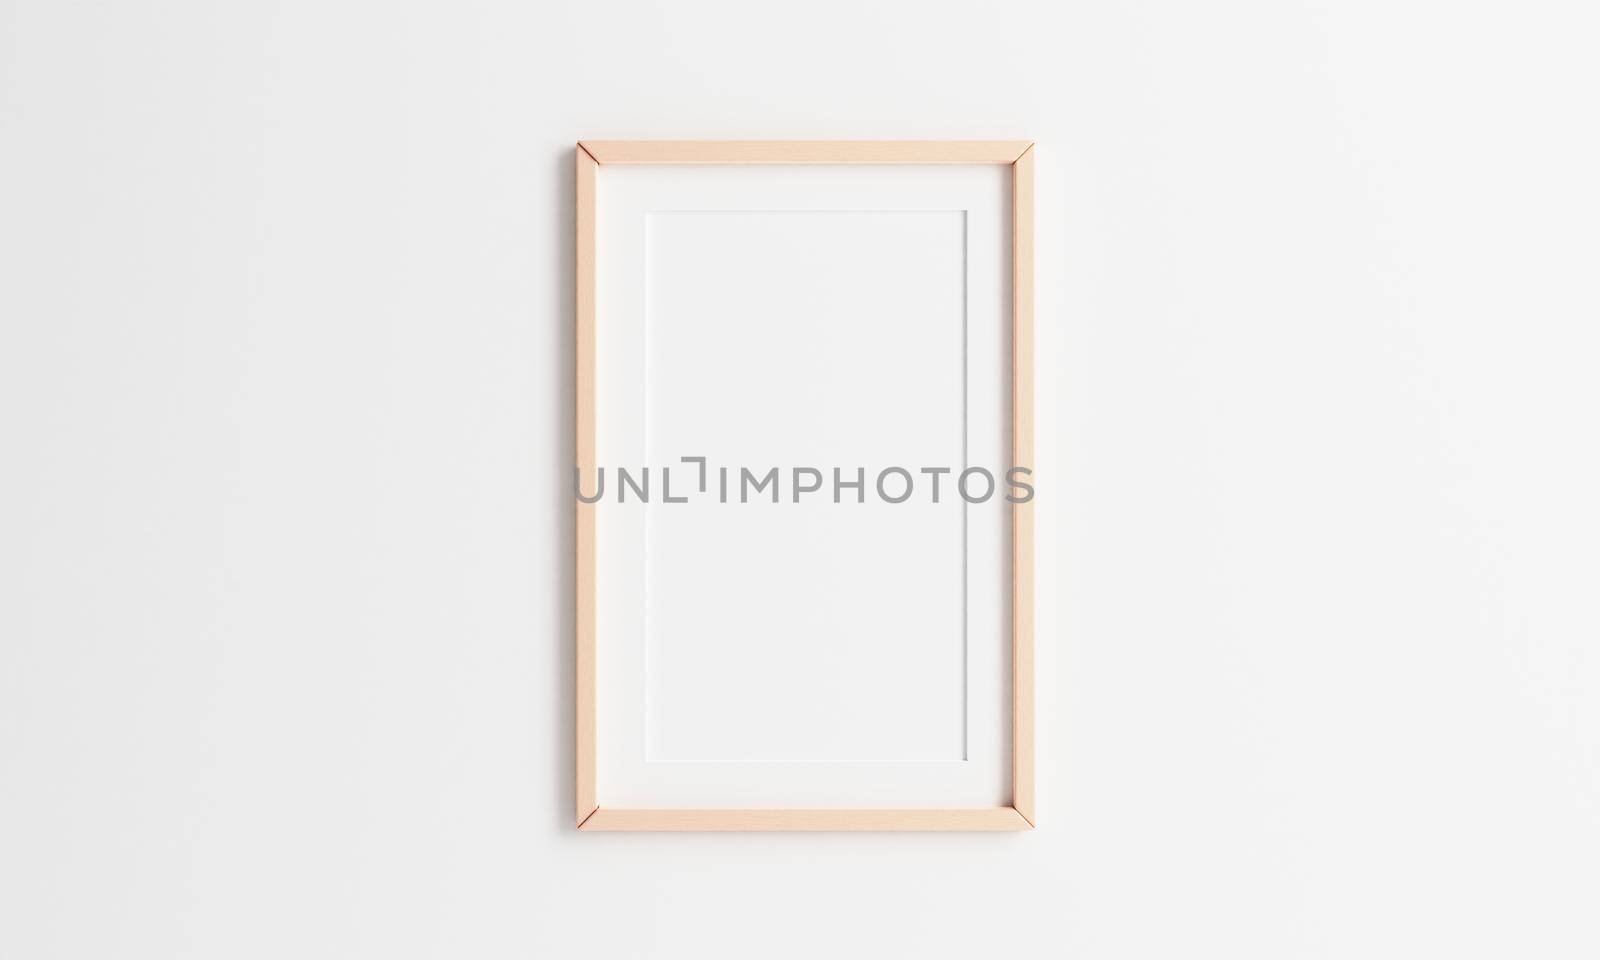 Wooden picture frame hanging on white wall background. 2:3 ratio photo frame size. 3D illustration rendering graphic interior design